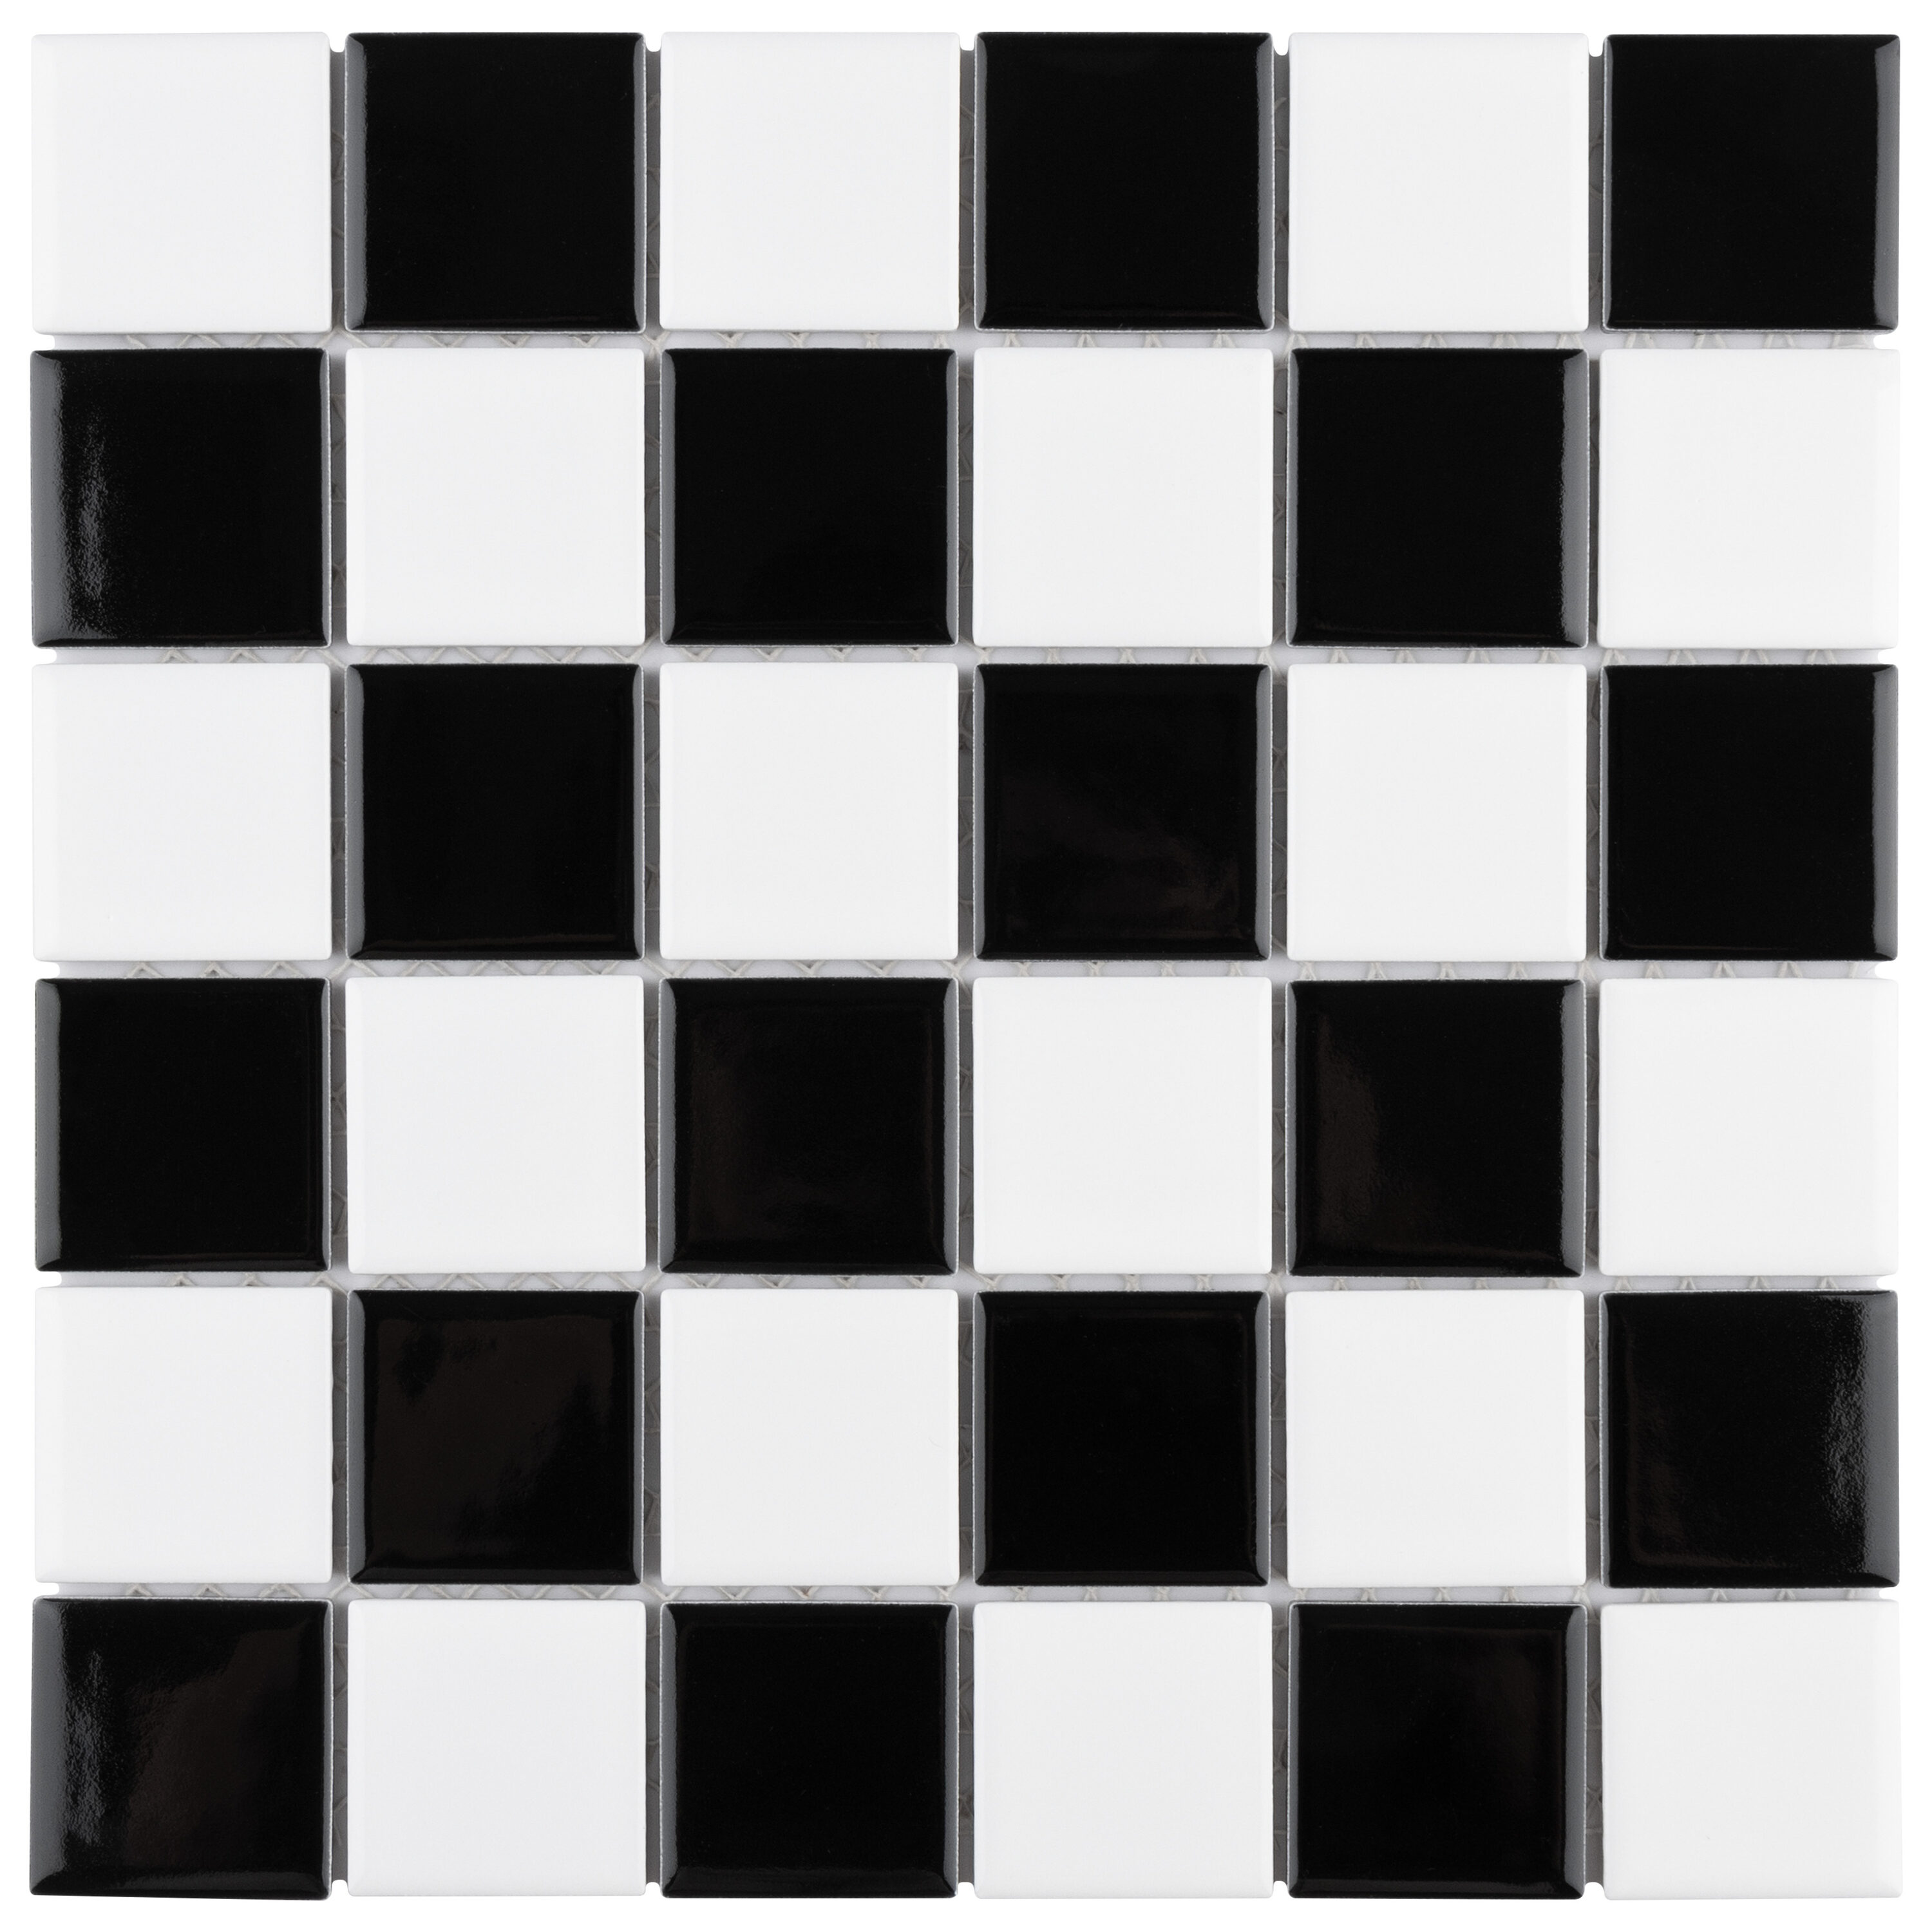 Affinity Tile Metro Quad Checkerboard Glossy Black and White 12-in x 12-in Glossy Porcelain Uniform Squares Patterned Floor and Wall Tile 9.8-sq -  FTCM2QCGBW